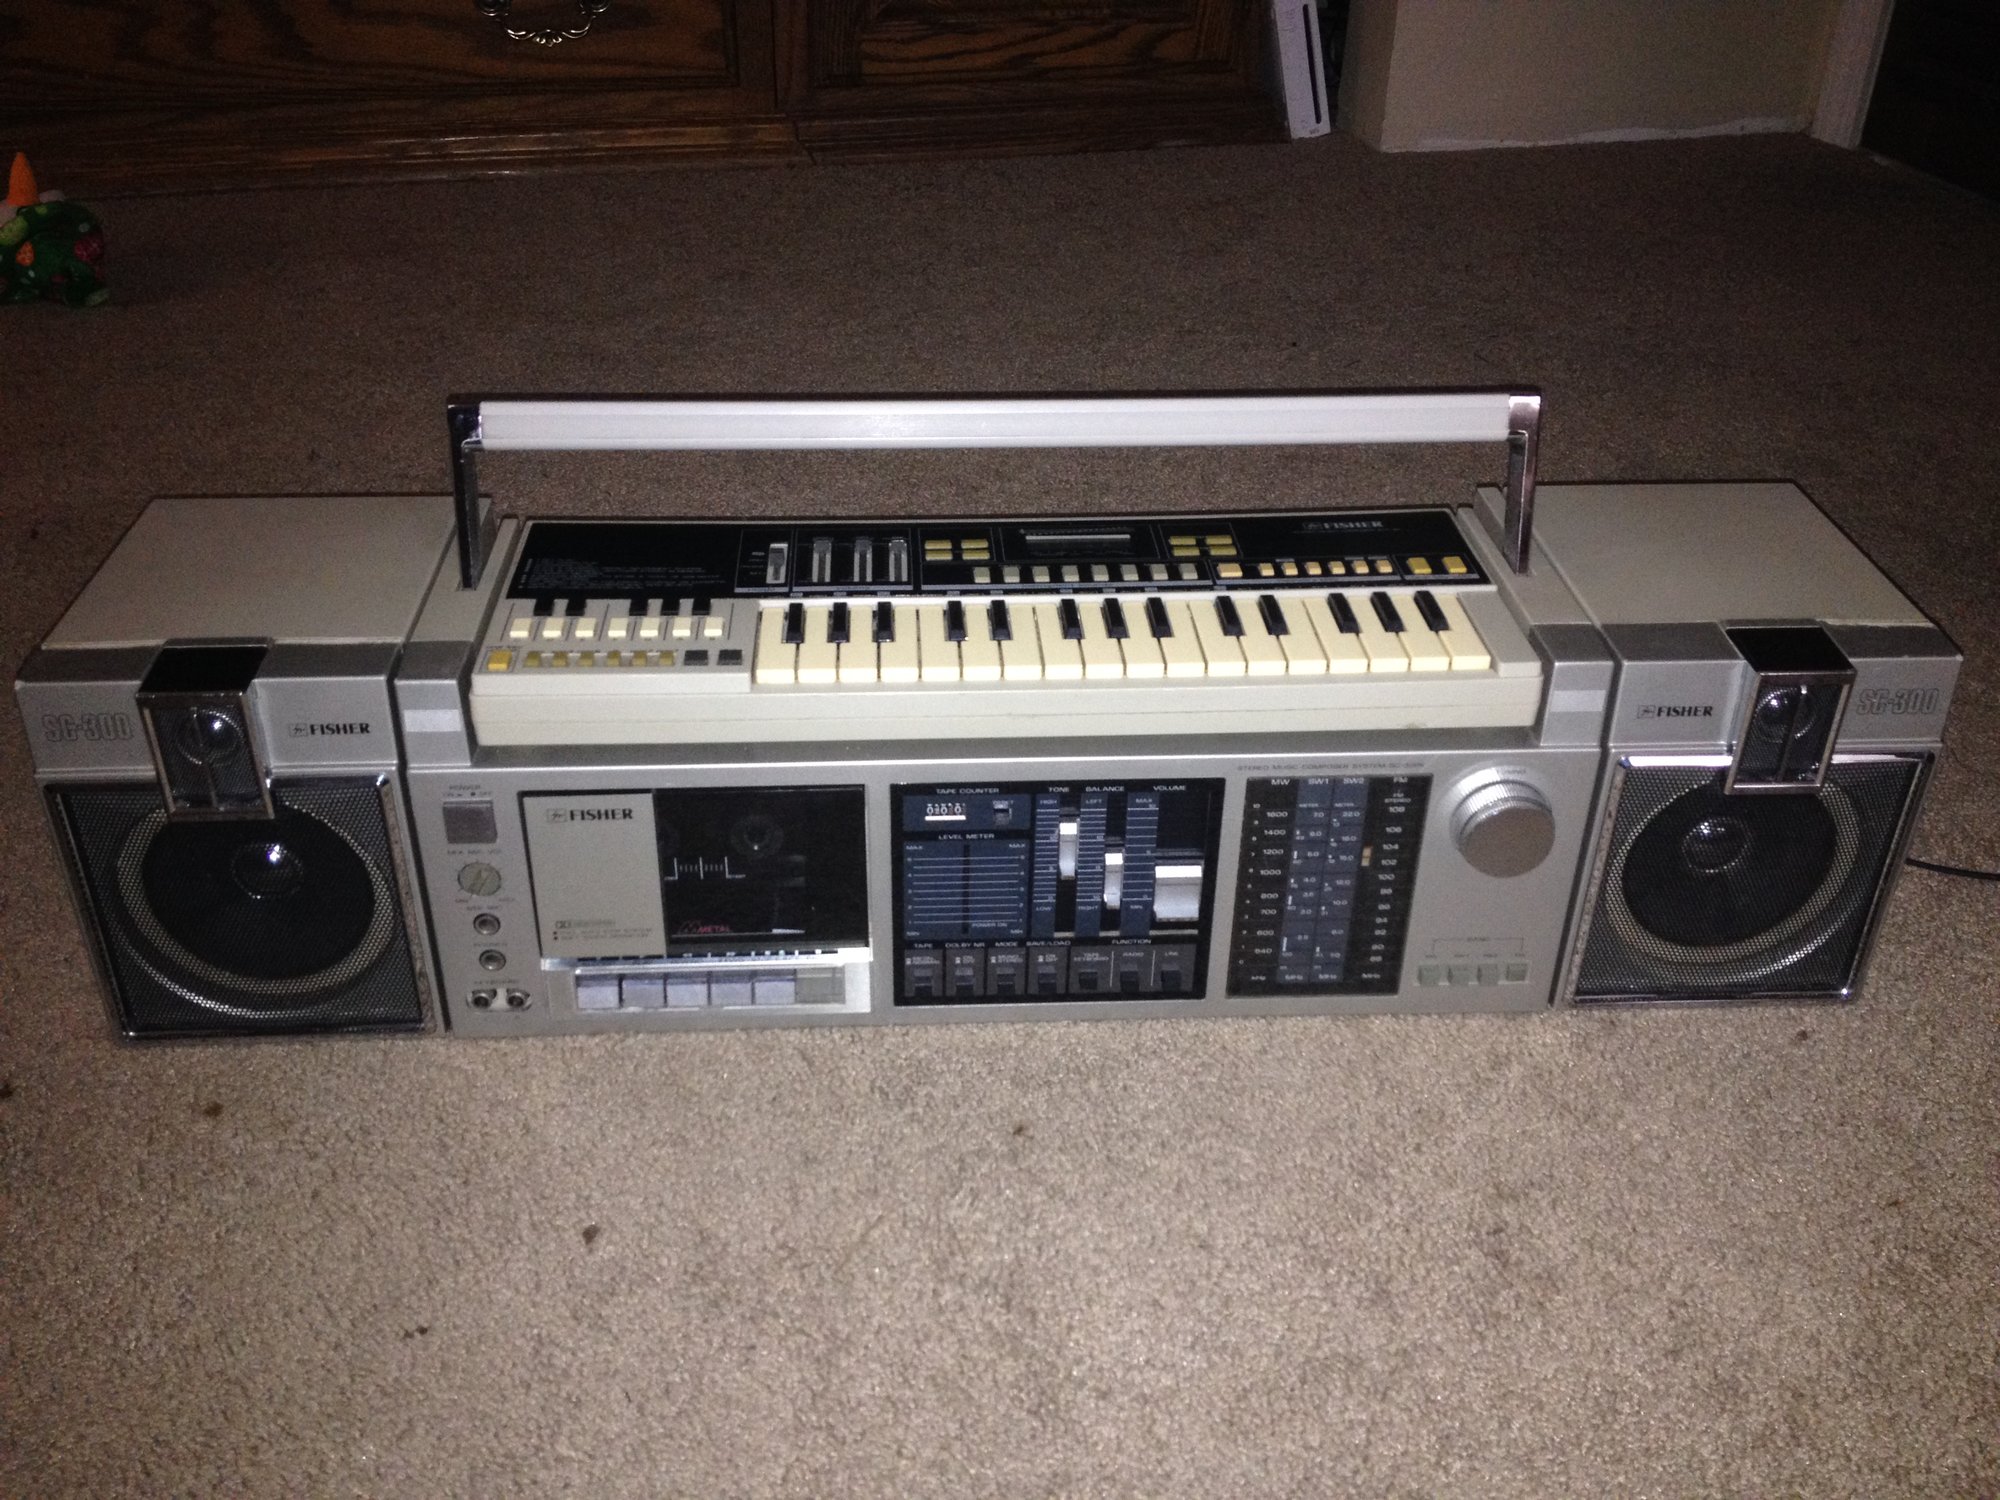 Keyboard Boombox Restoration! | Stereo2Go forums